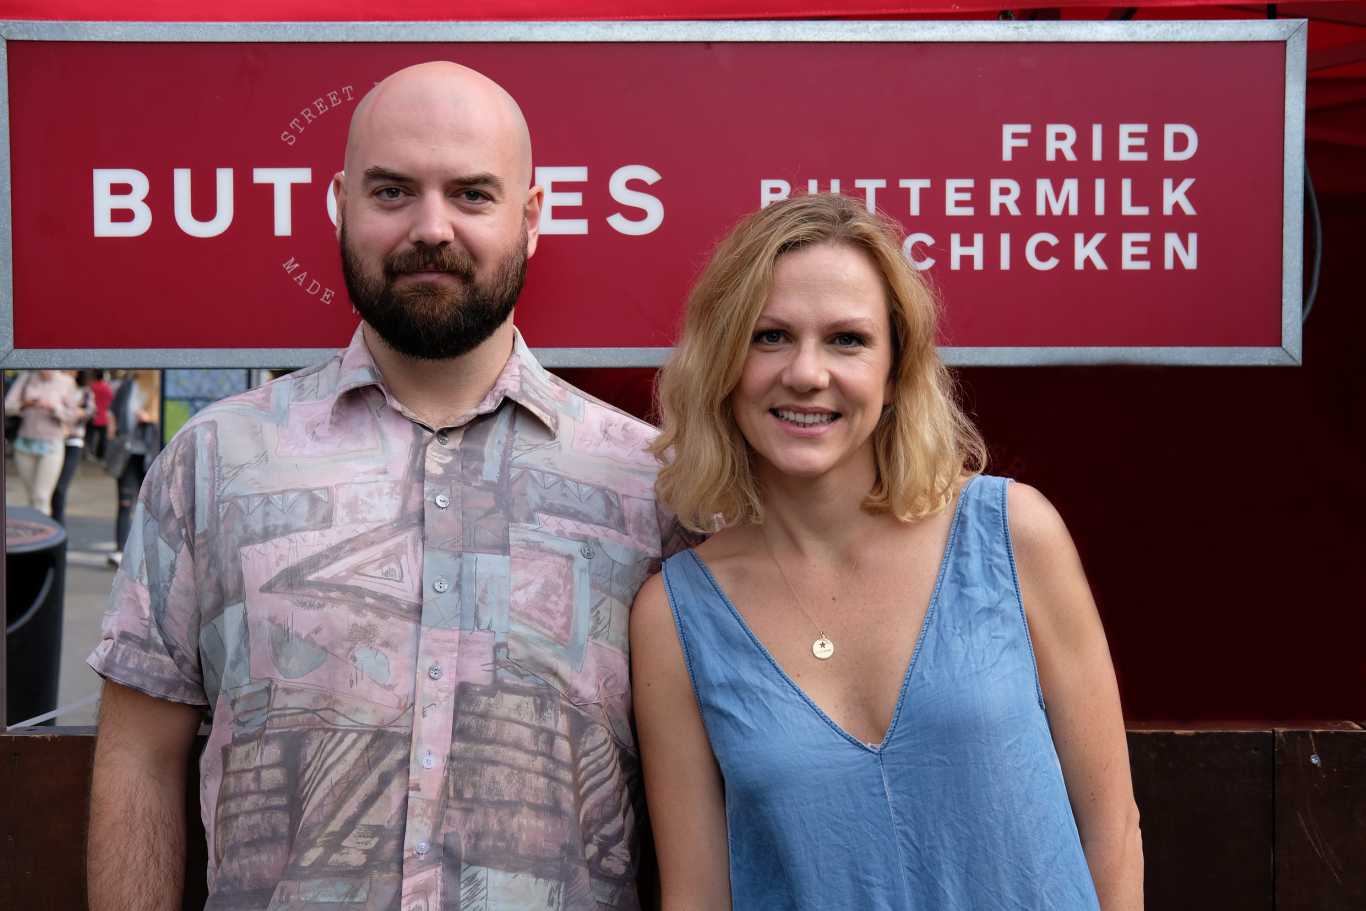 The couple behind Butchies. Photo: PR